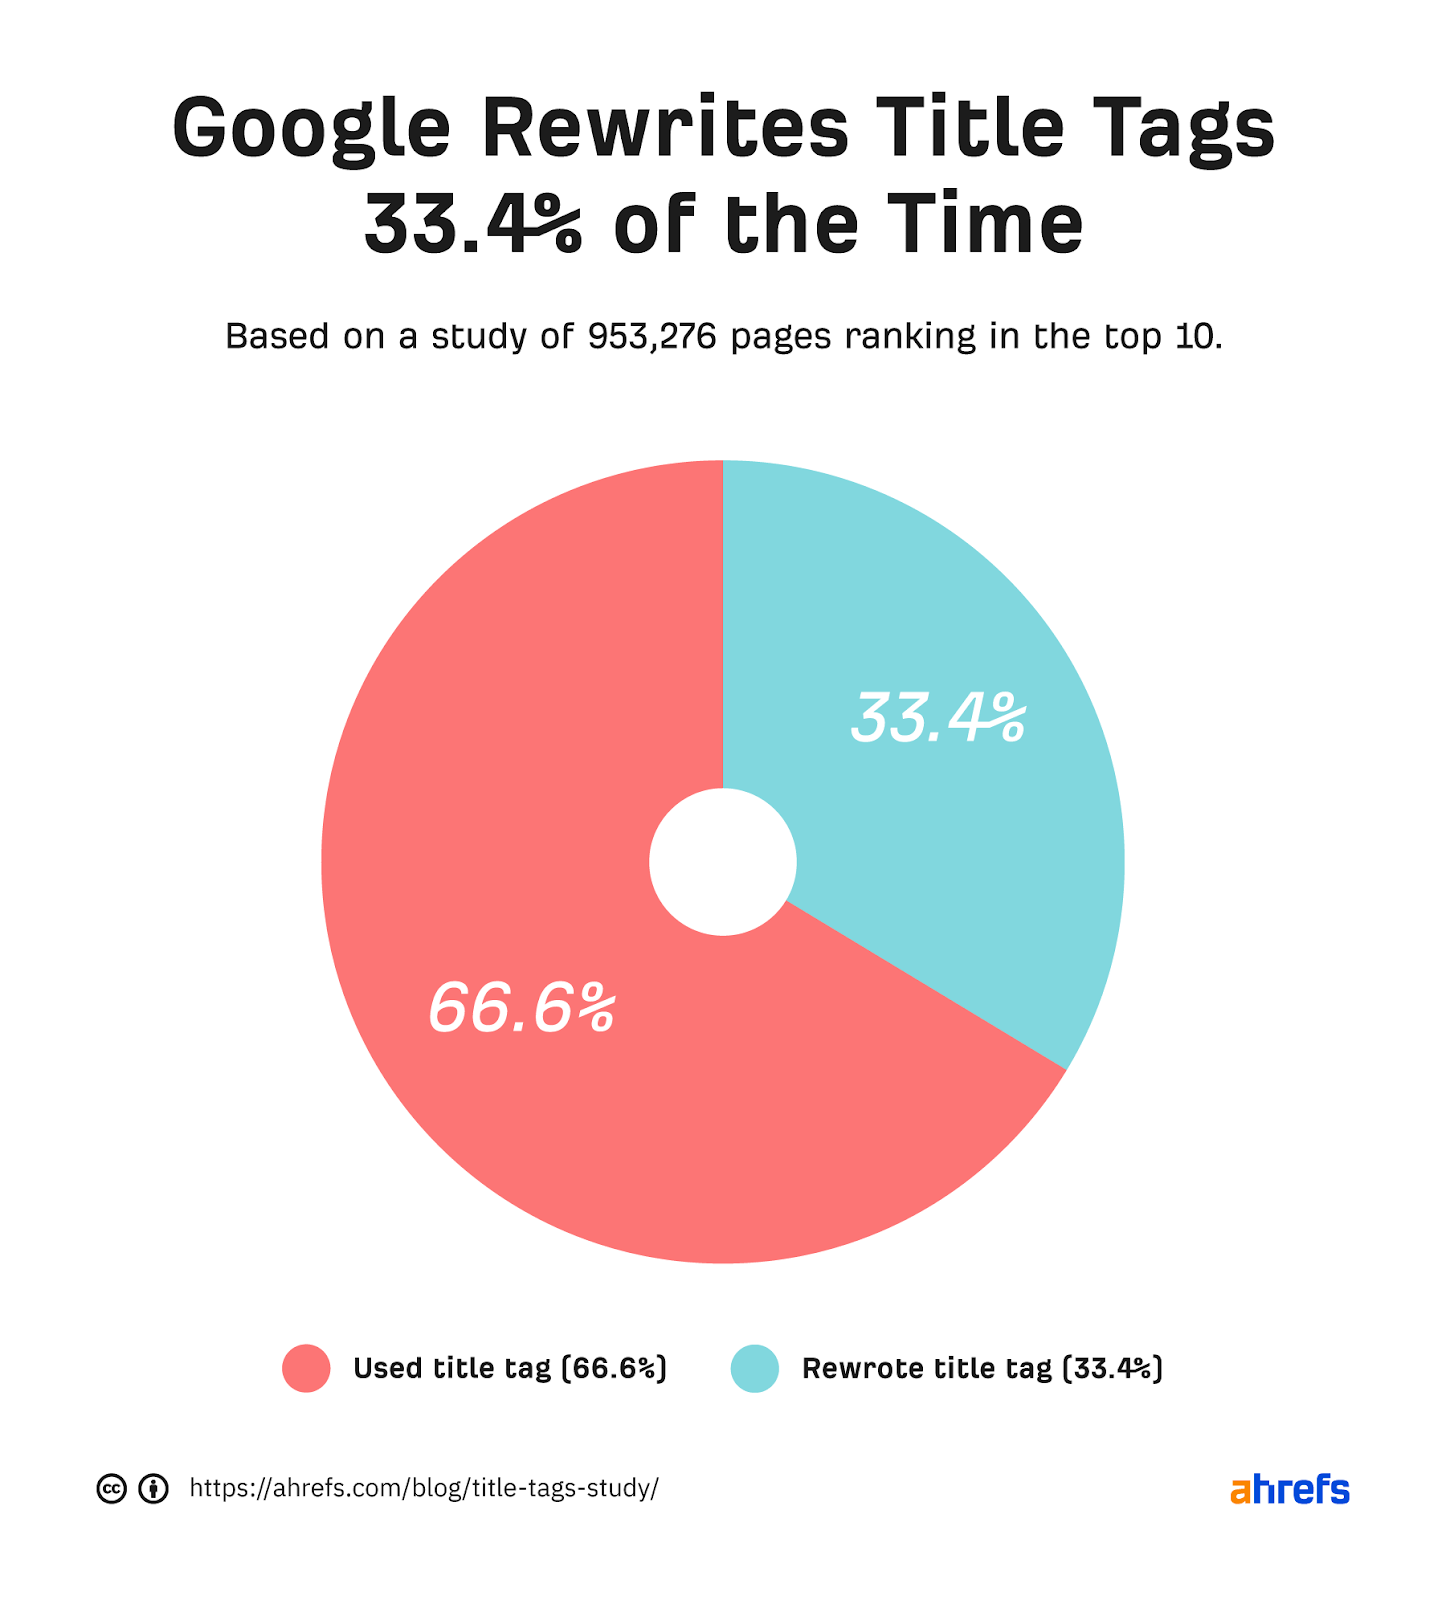 Our title tags study showing that Google rewrites title tags only 33.4% of the time